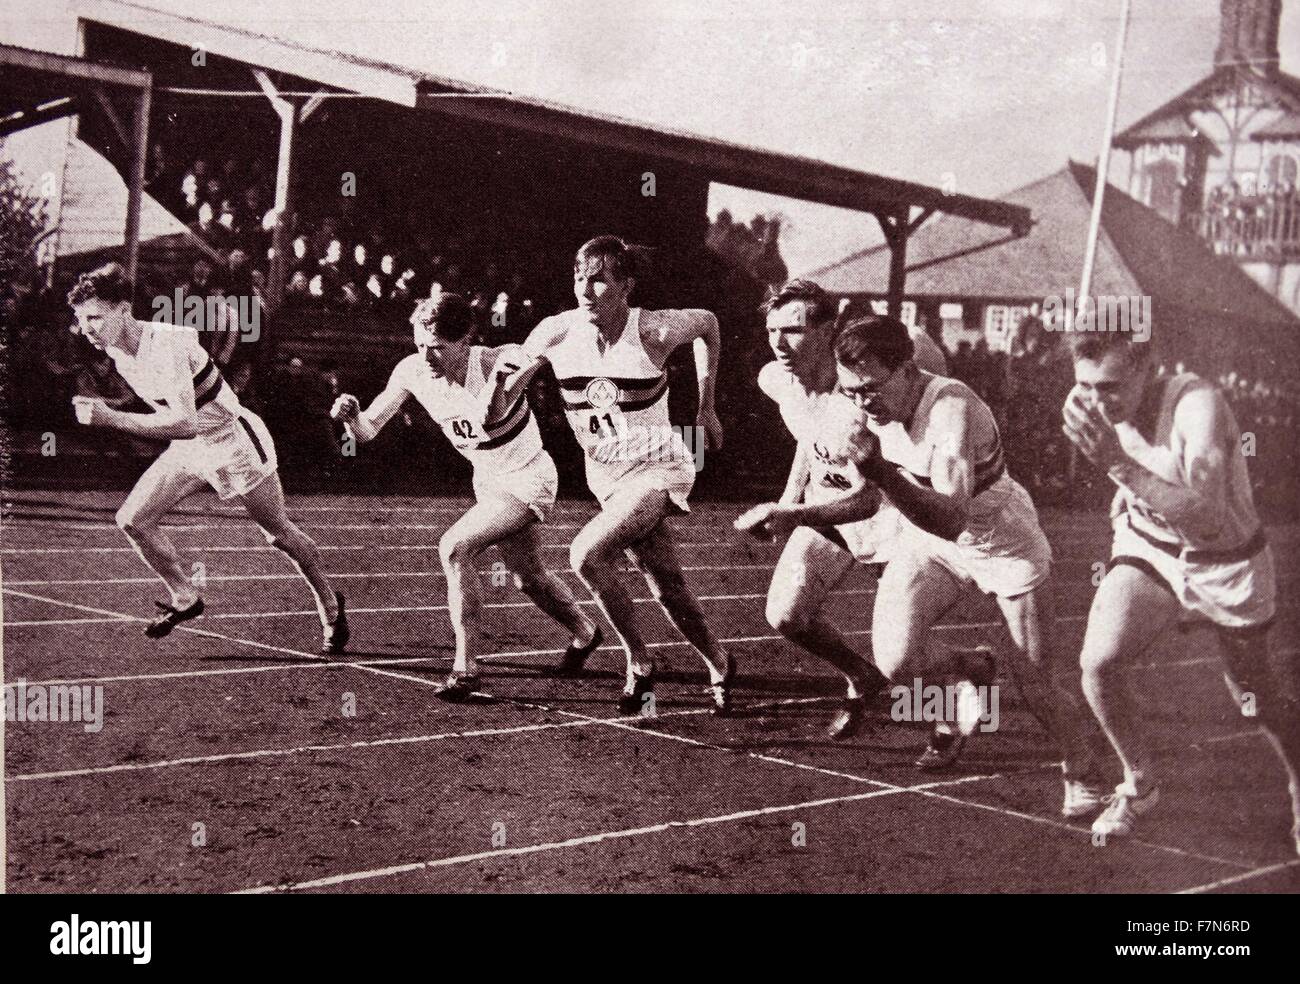 The start of the race when Roger Bannister (b. 1929) (third from left) broke the world's mile record. Stock Photo